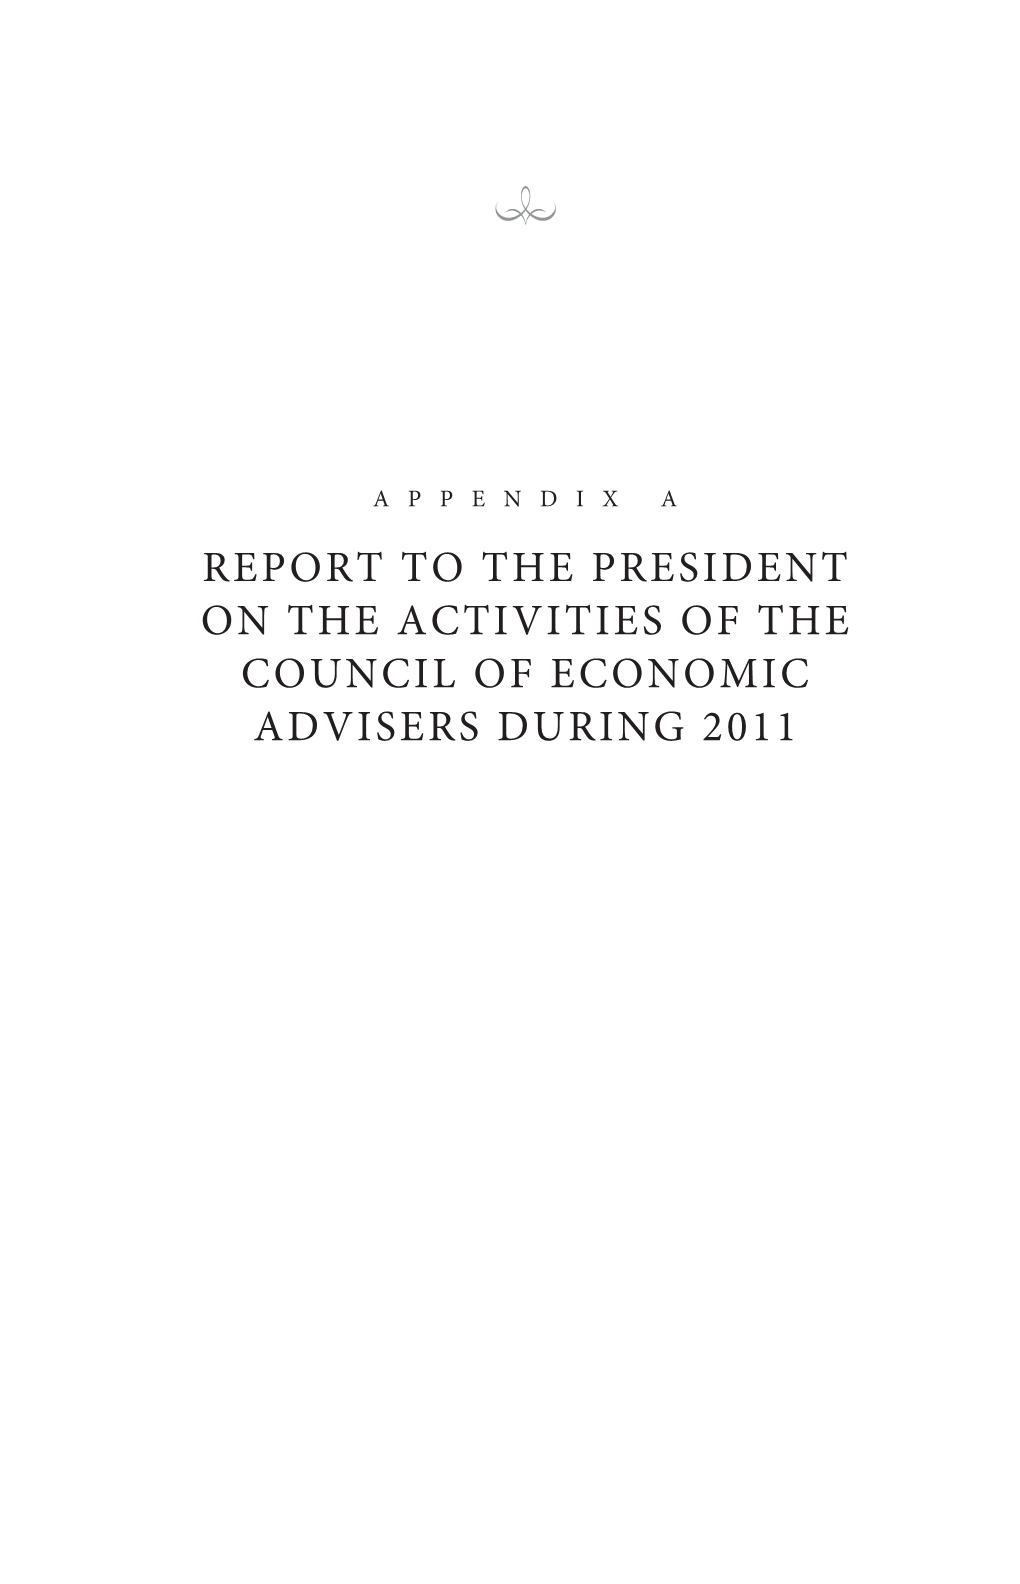 Report to the President on the Activities of the Council of Economic Advisers During 2011